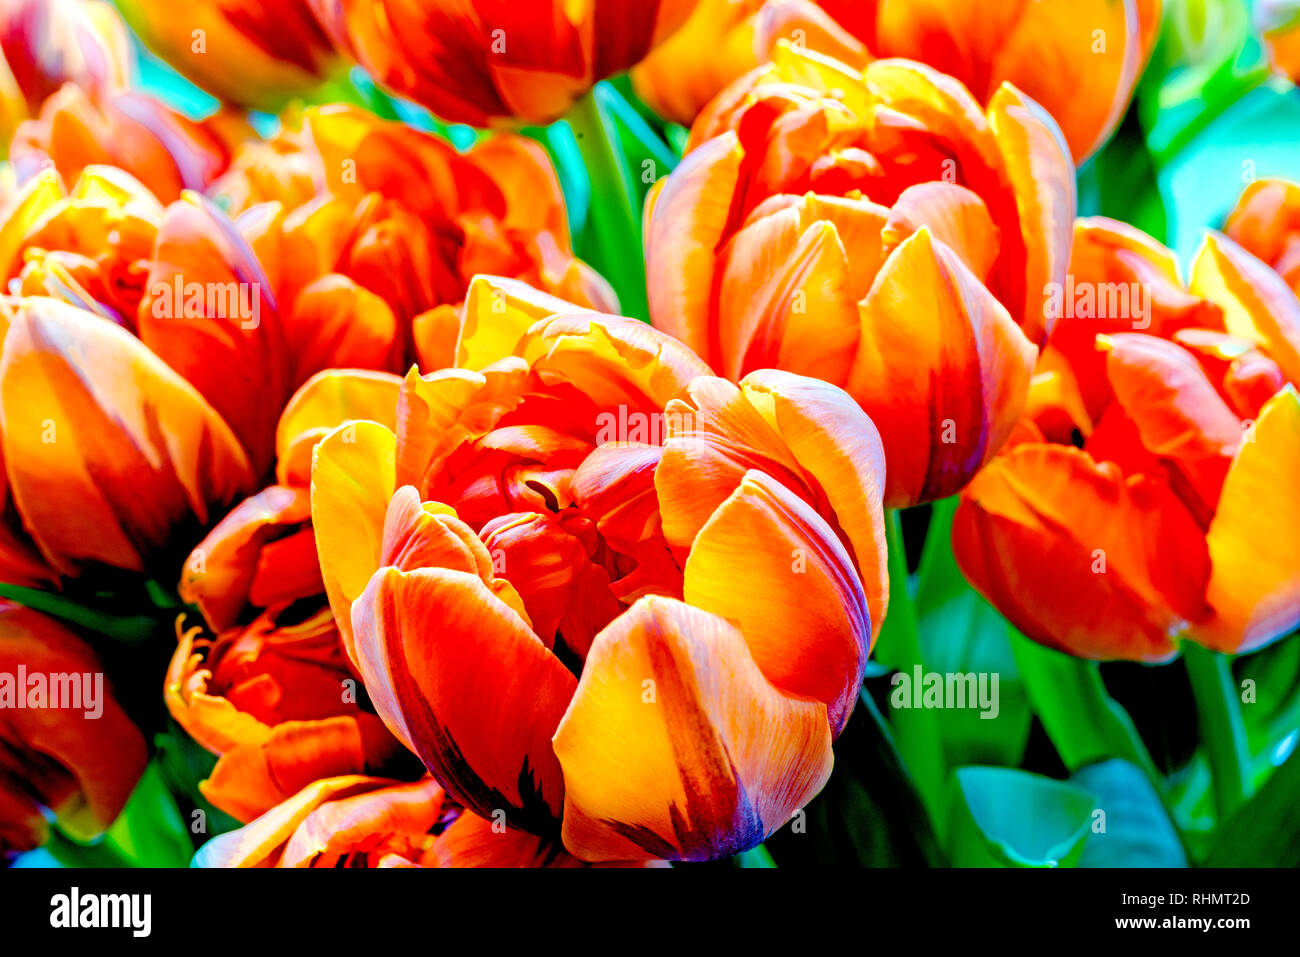 Bunch of tulips - red and yellow; Tulpenstrauß - rot und gelb Stock Photo